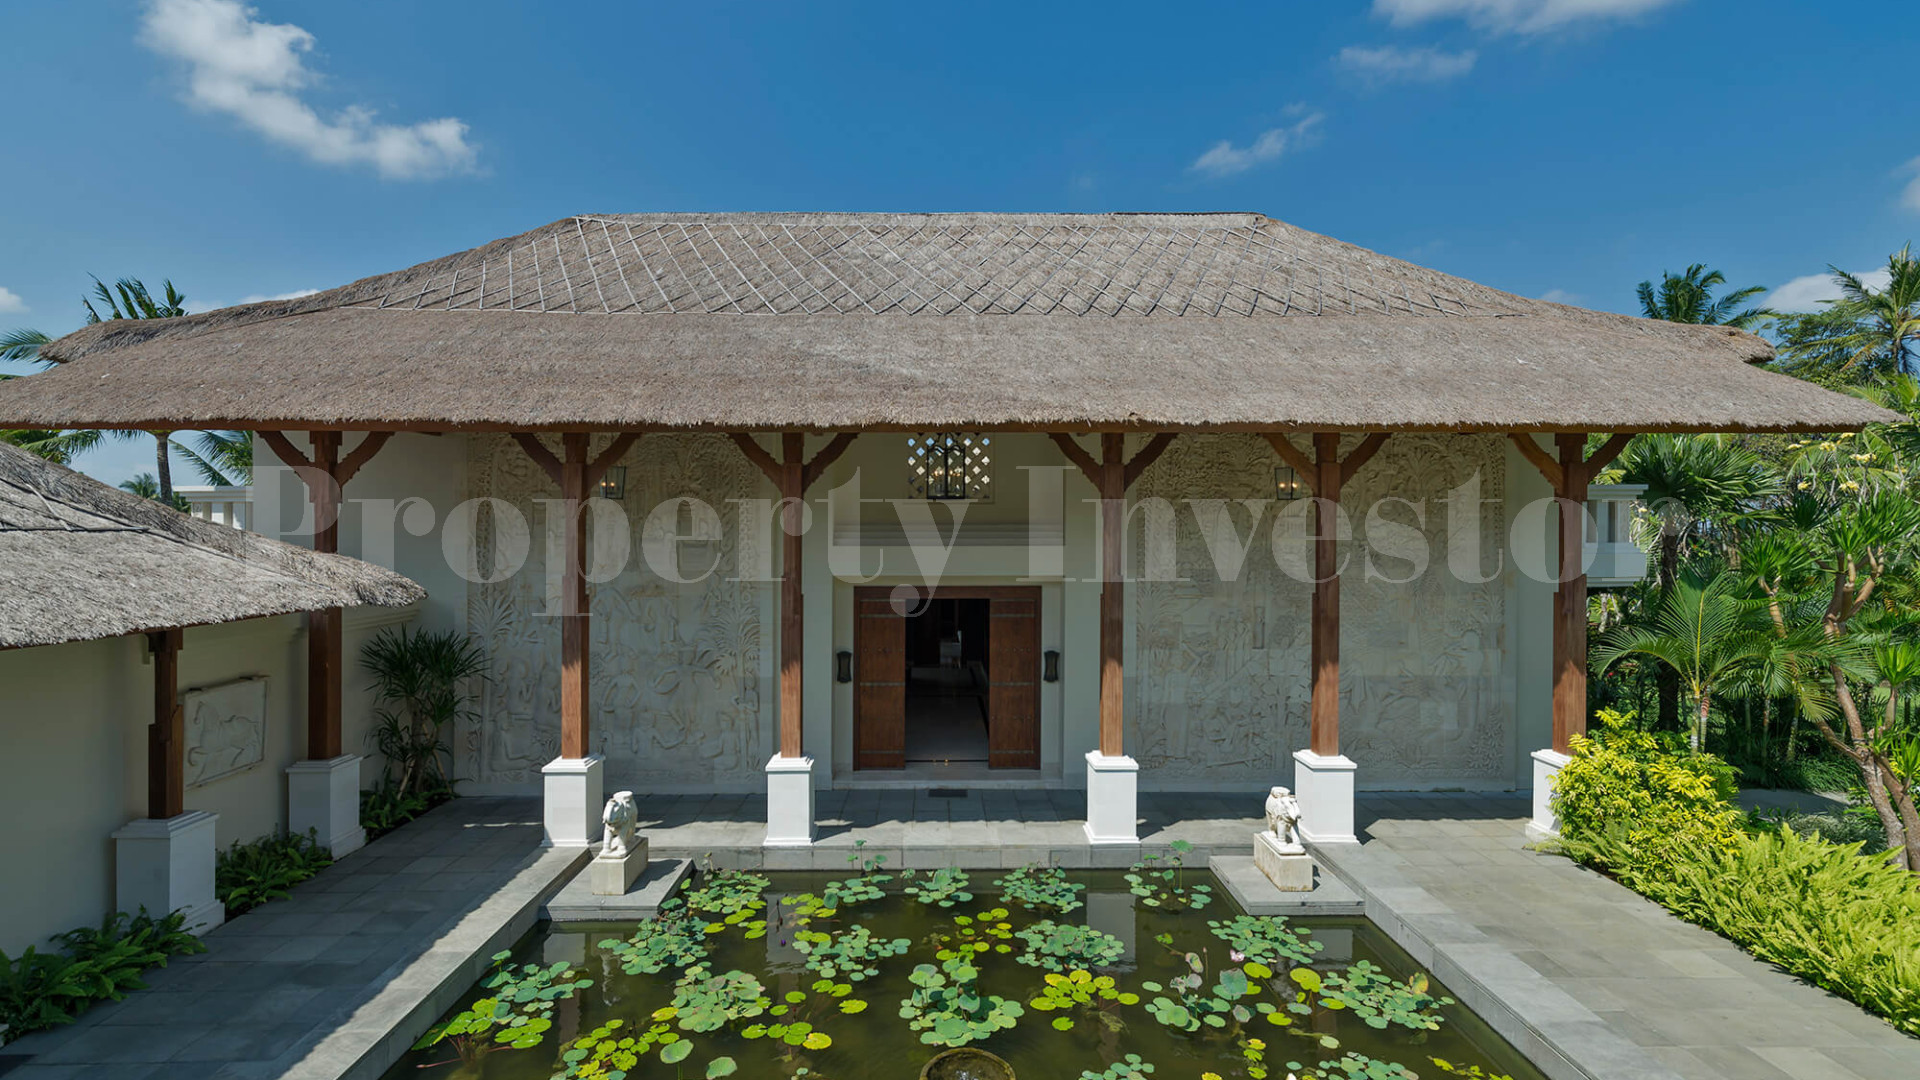 Exceptional 8 Bedroom Luxury Estate with Magnificent Landscaped Gardens for Sale in Tabanan, Bali